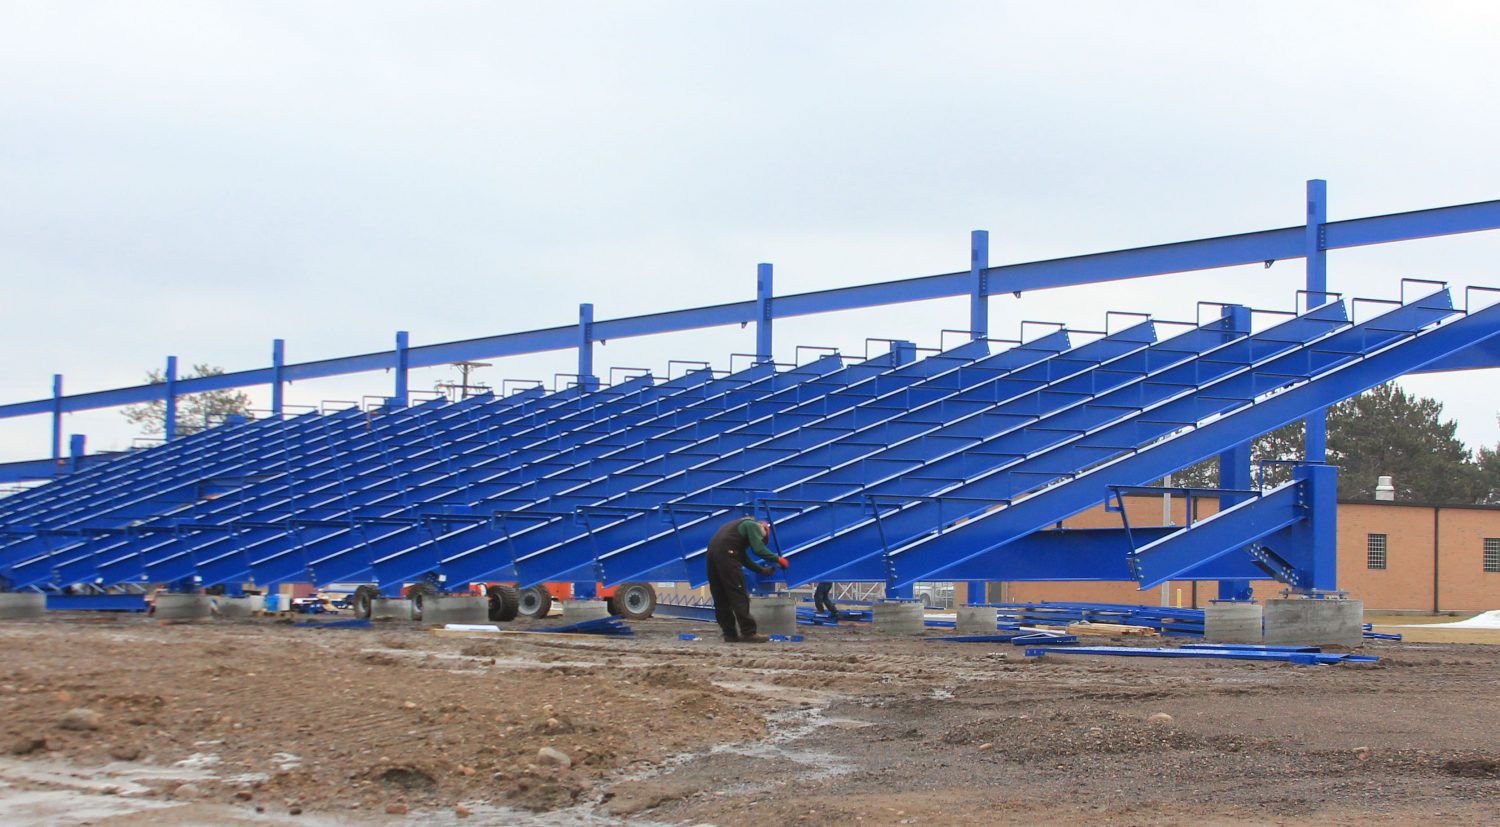 Grandstand under construction at Merrill Festival Grounds